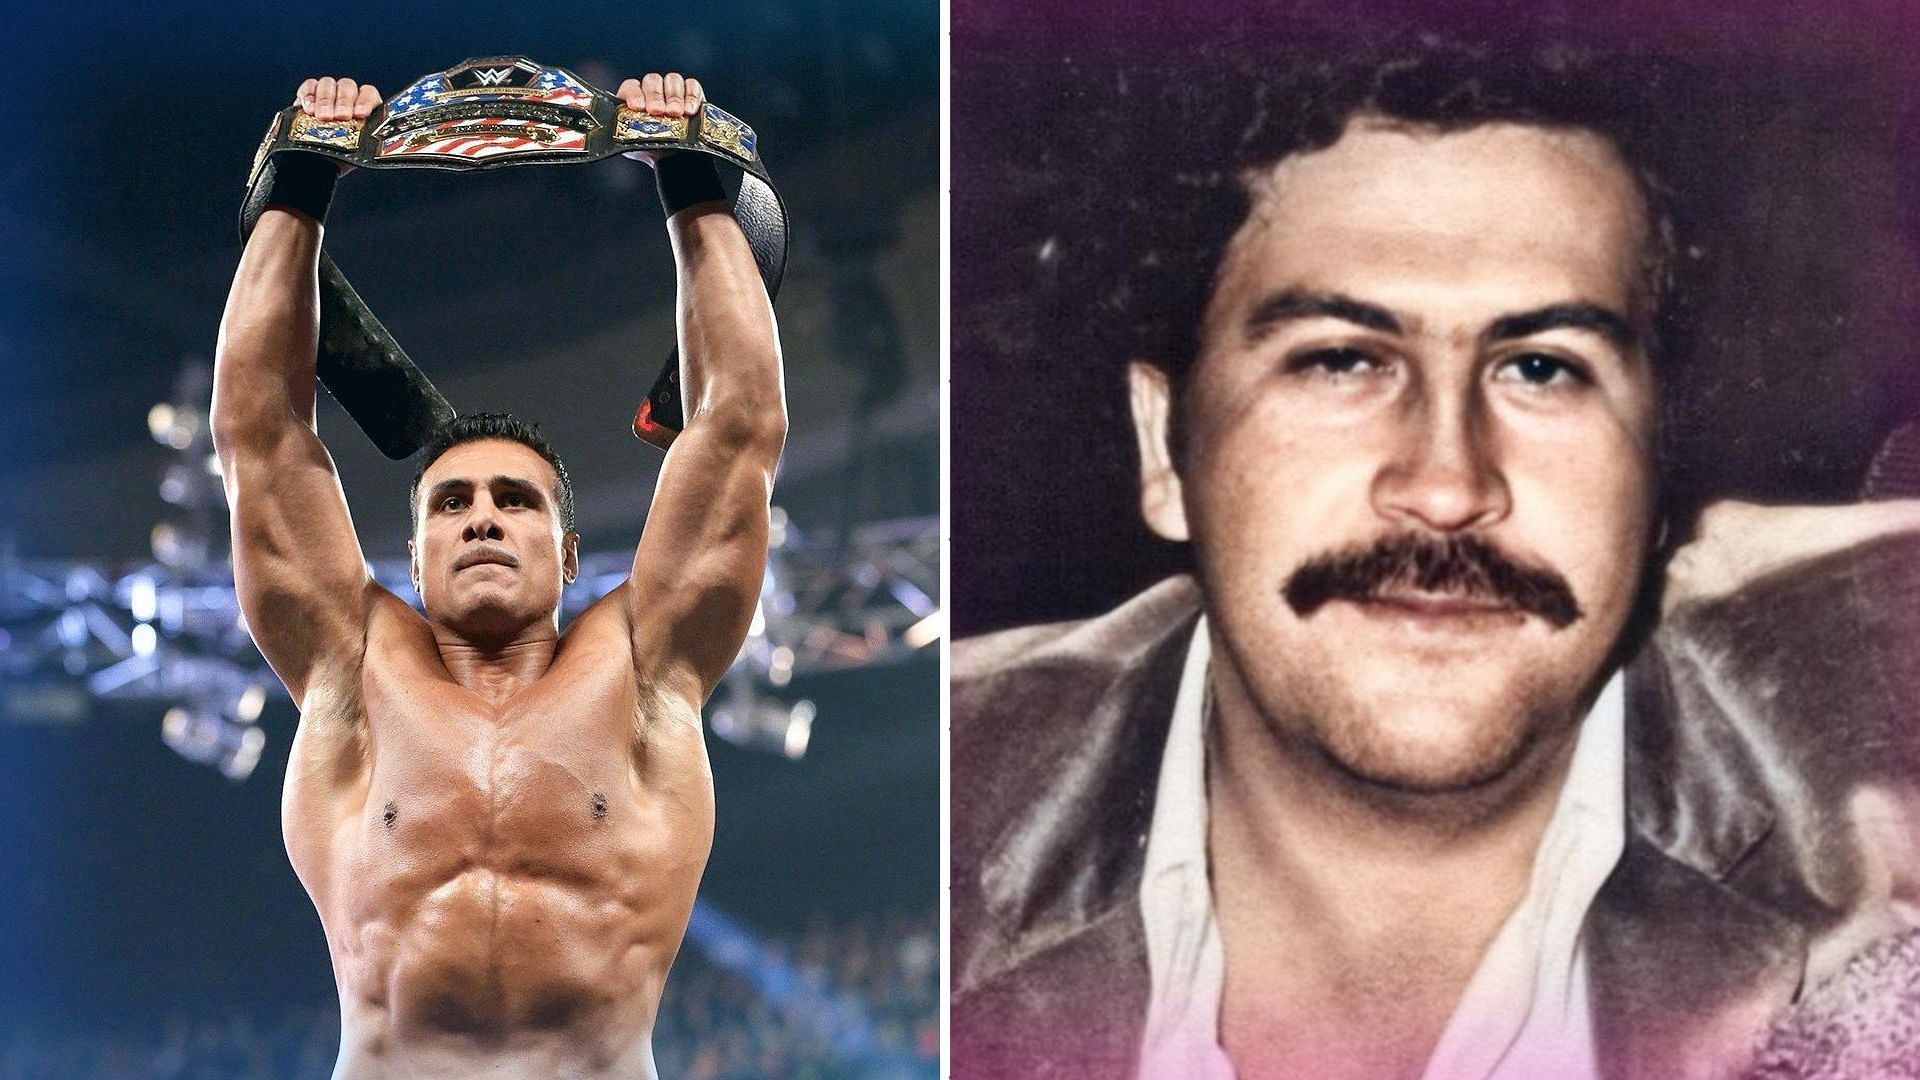 Alberto Del Rio&#039;s legendary gimmick was influenced by Pablo Escobar&#039;s character.